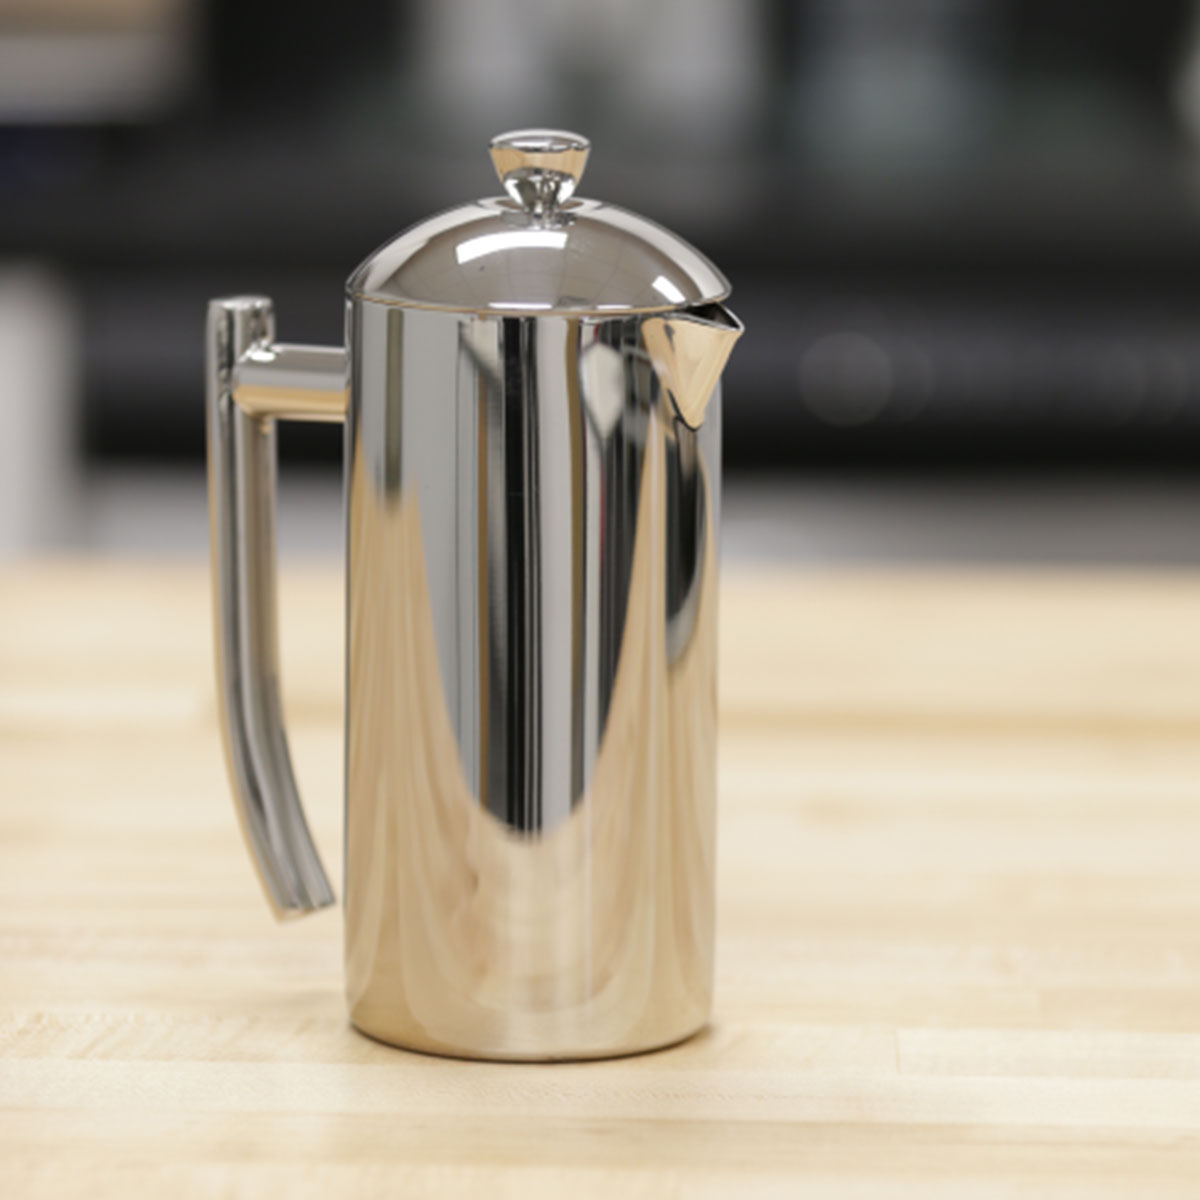 frieling french press